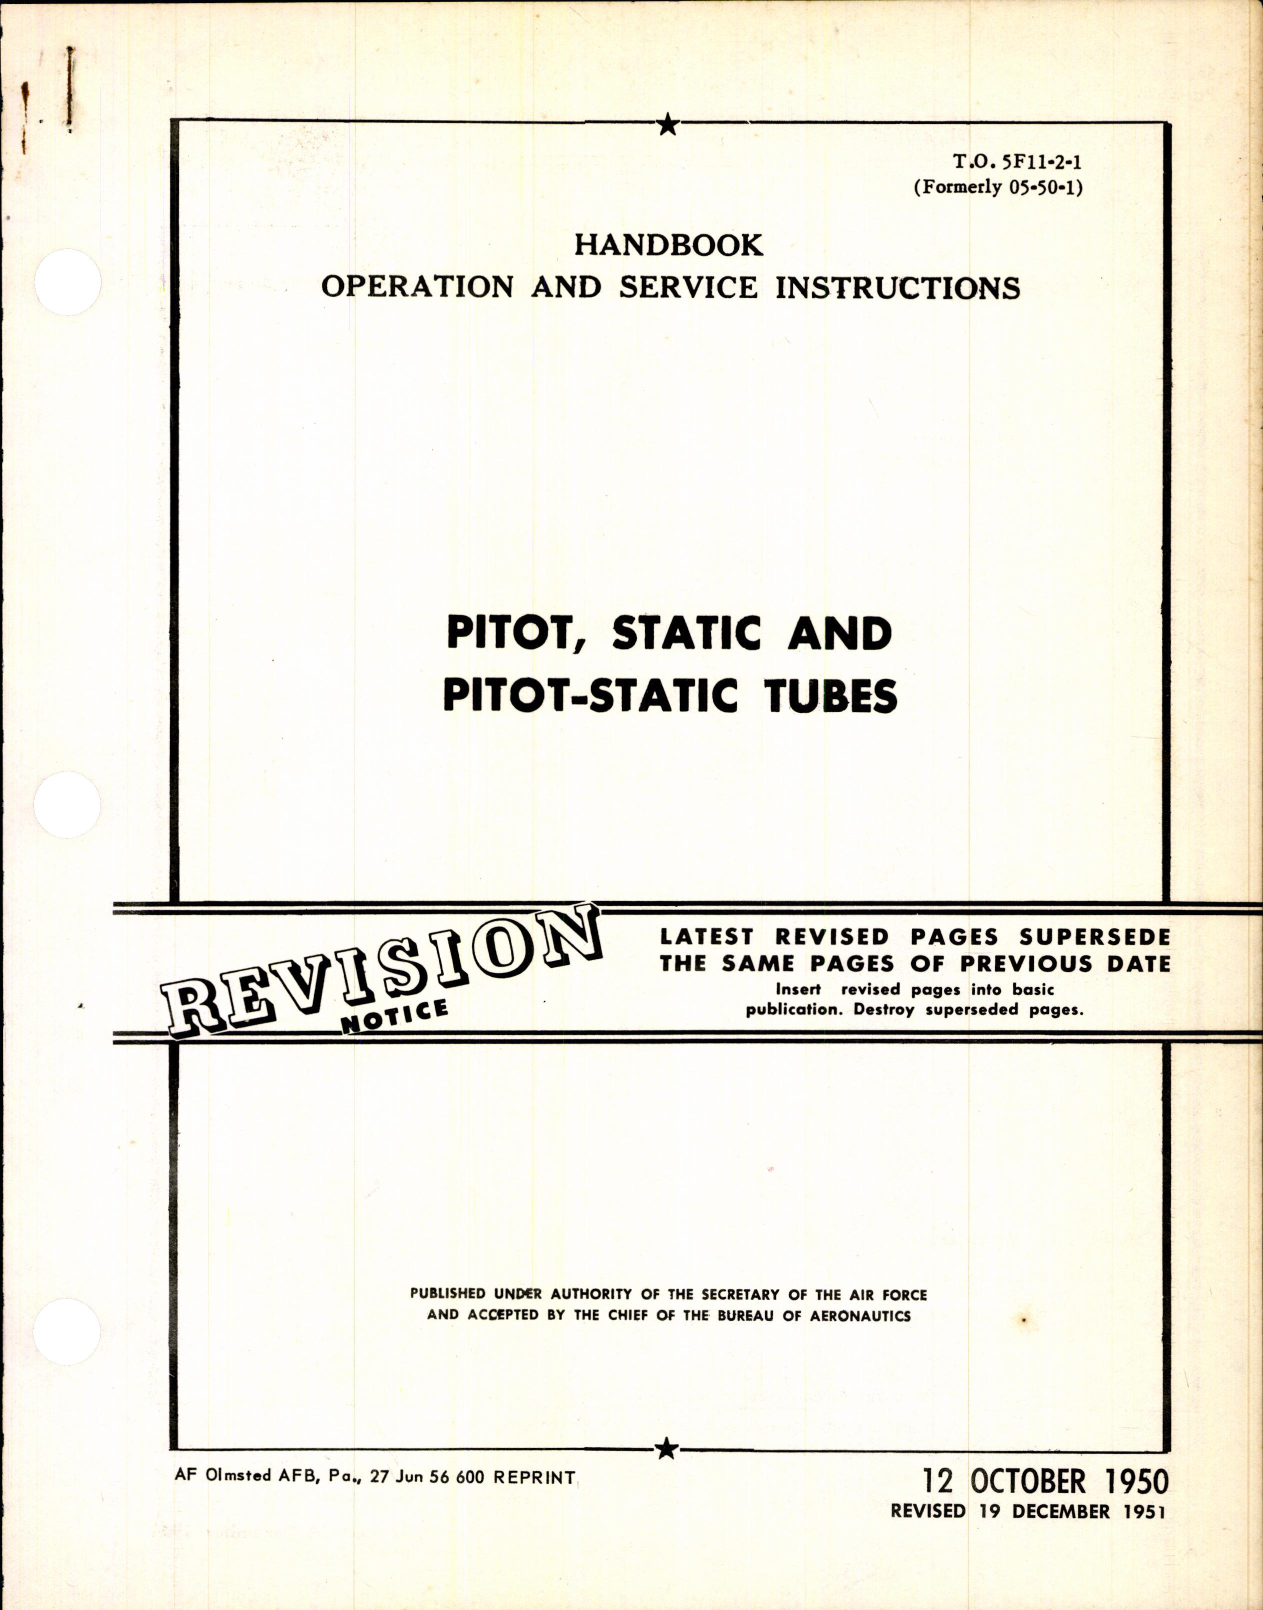 Sample page 1 from AirCorps Library document: T.O. No. 5F11-2-1, 05-50-1, Operation and Service Instructions, Pitot, Static, Pitot-Static Tubes, 19-Dec-1951